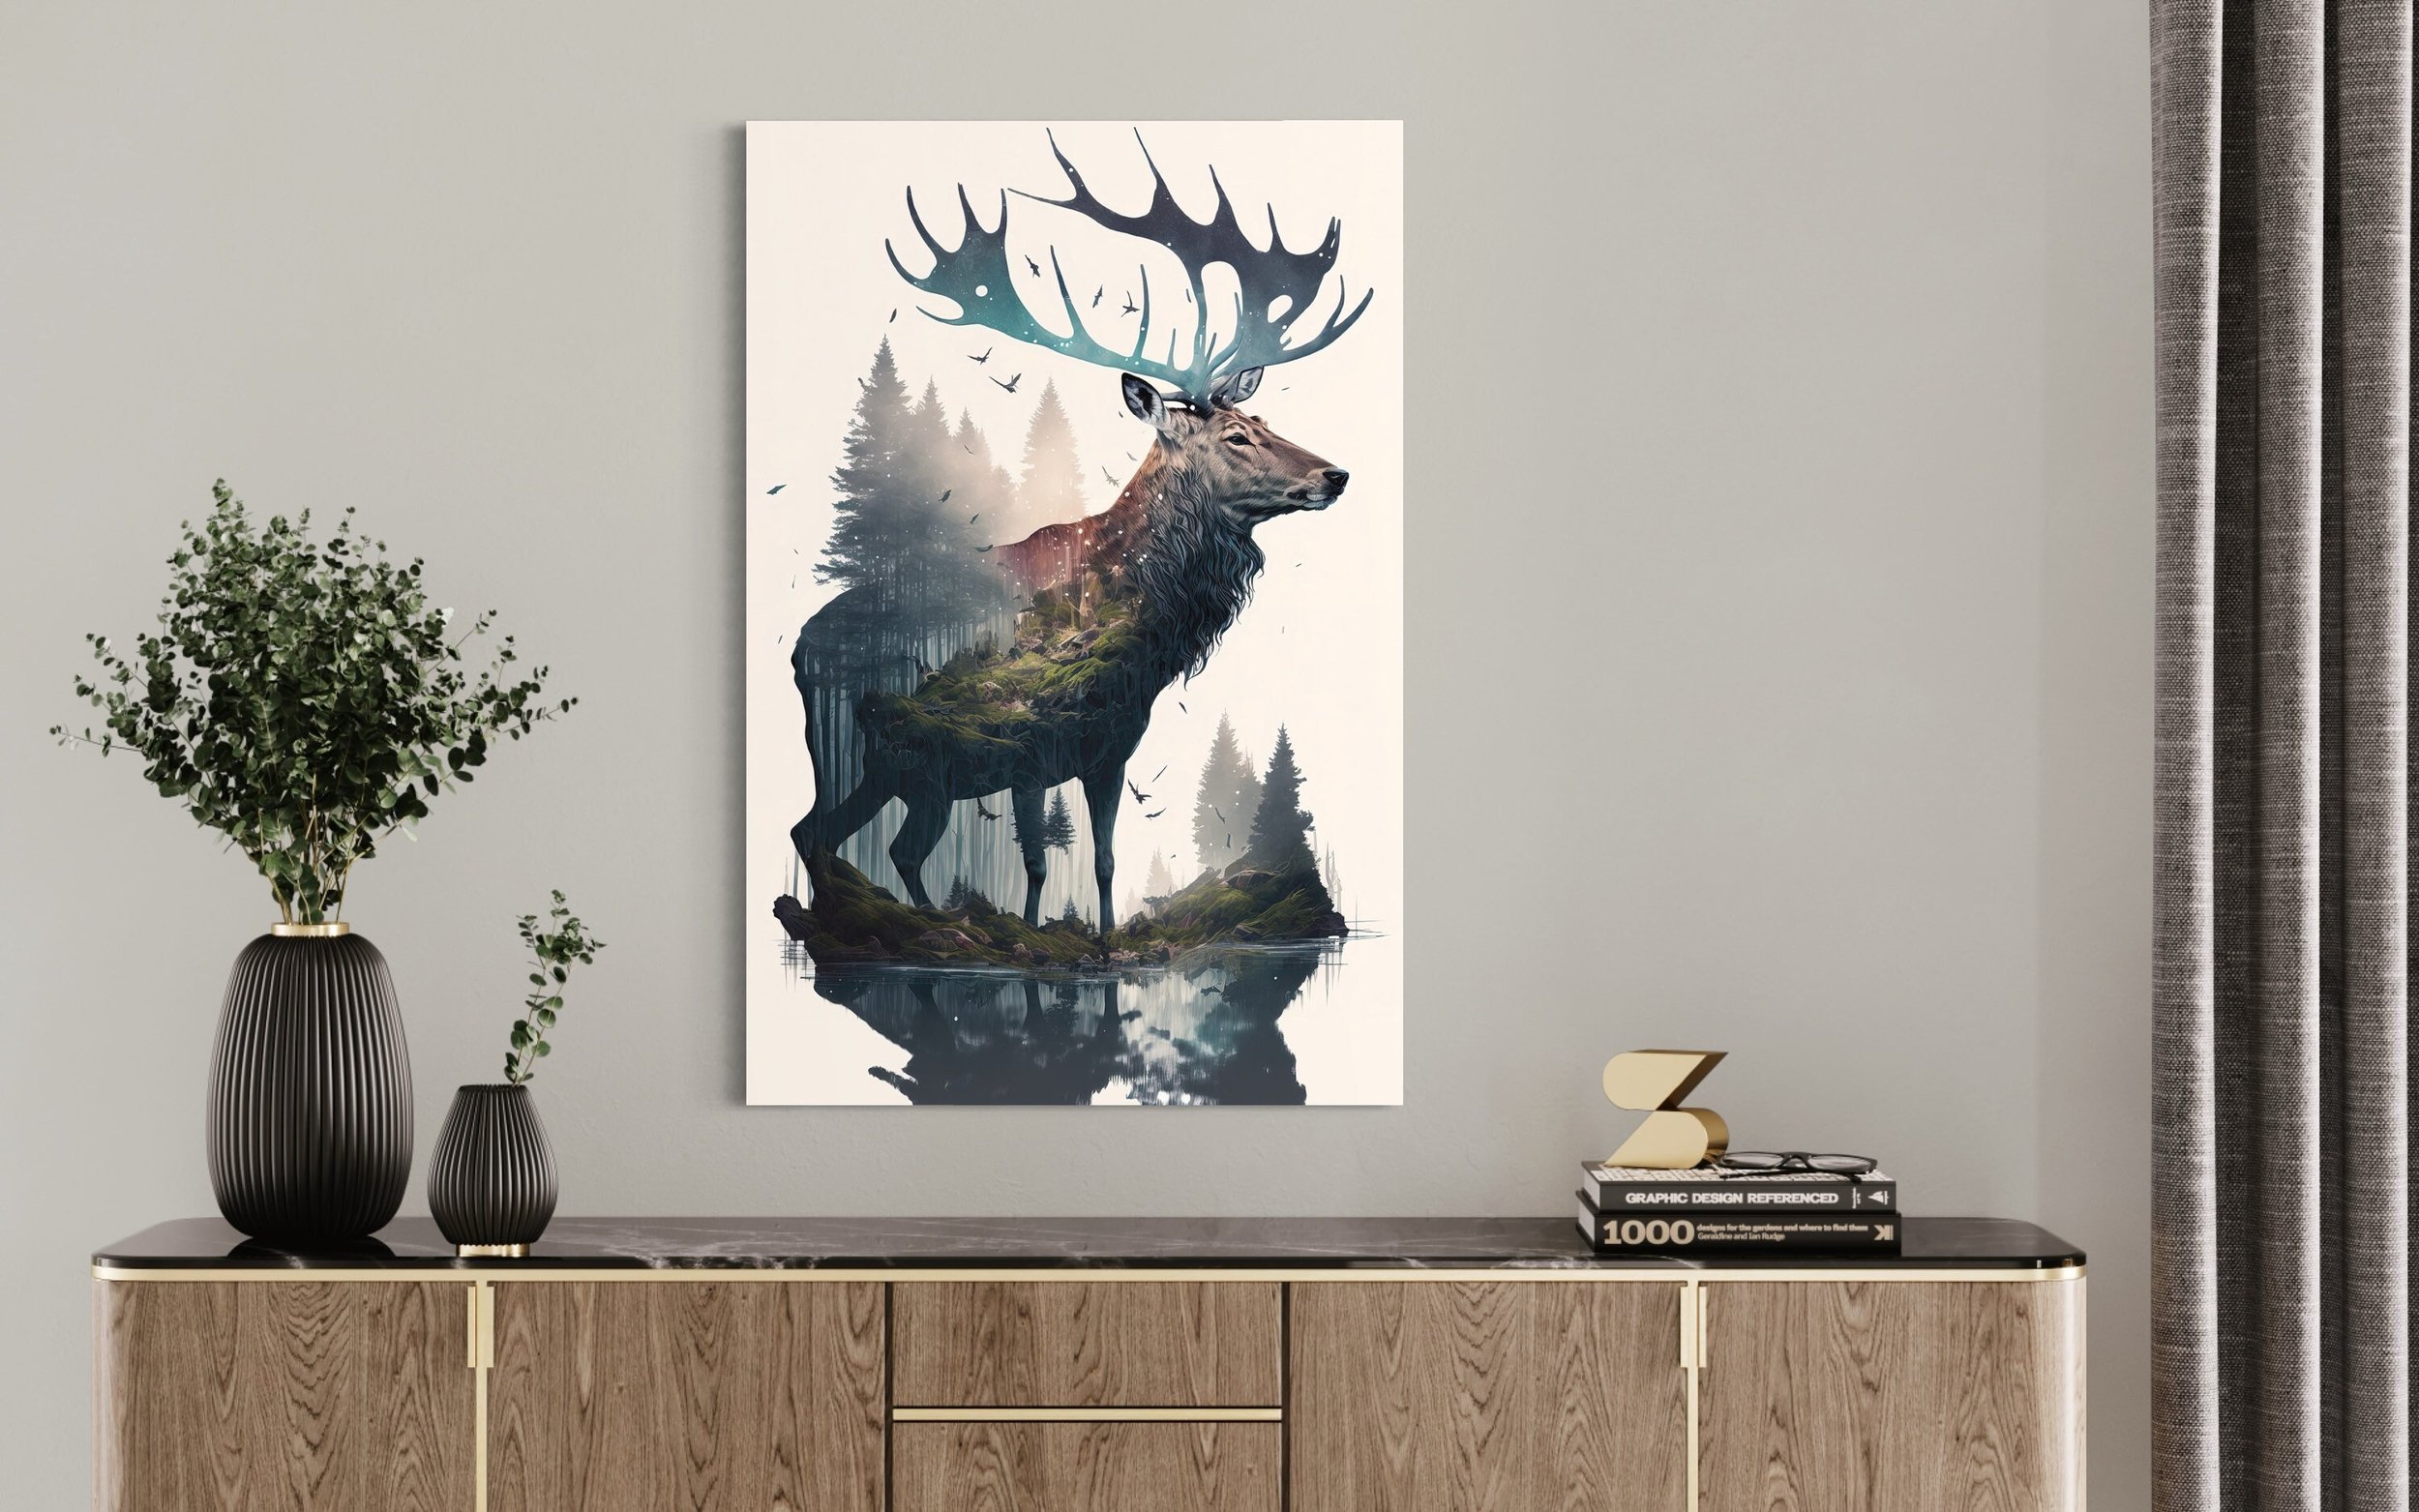 Deer Forest | Double Exposure Art Nature Decor Modern Wall Canvas Prints Metal Painting Cabin